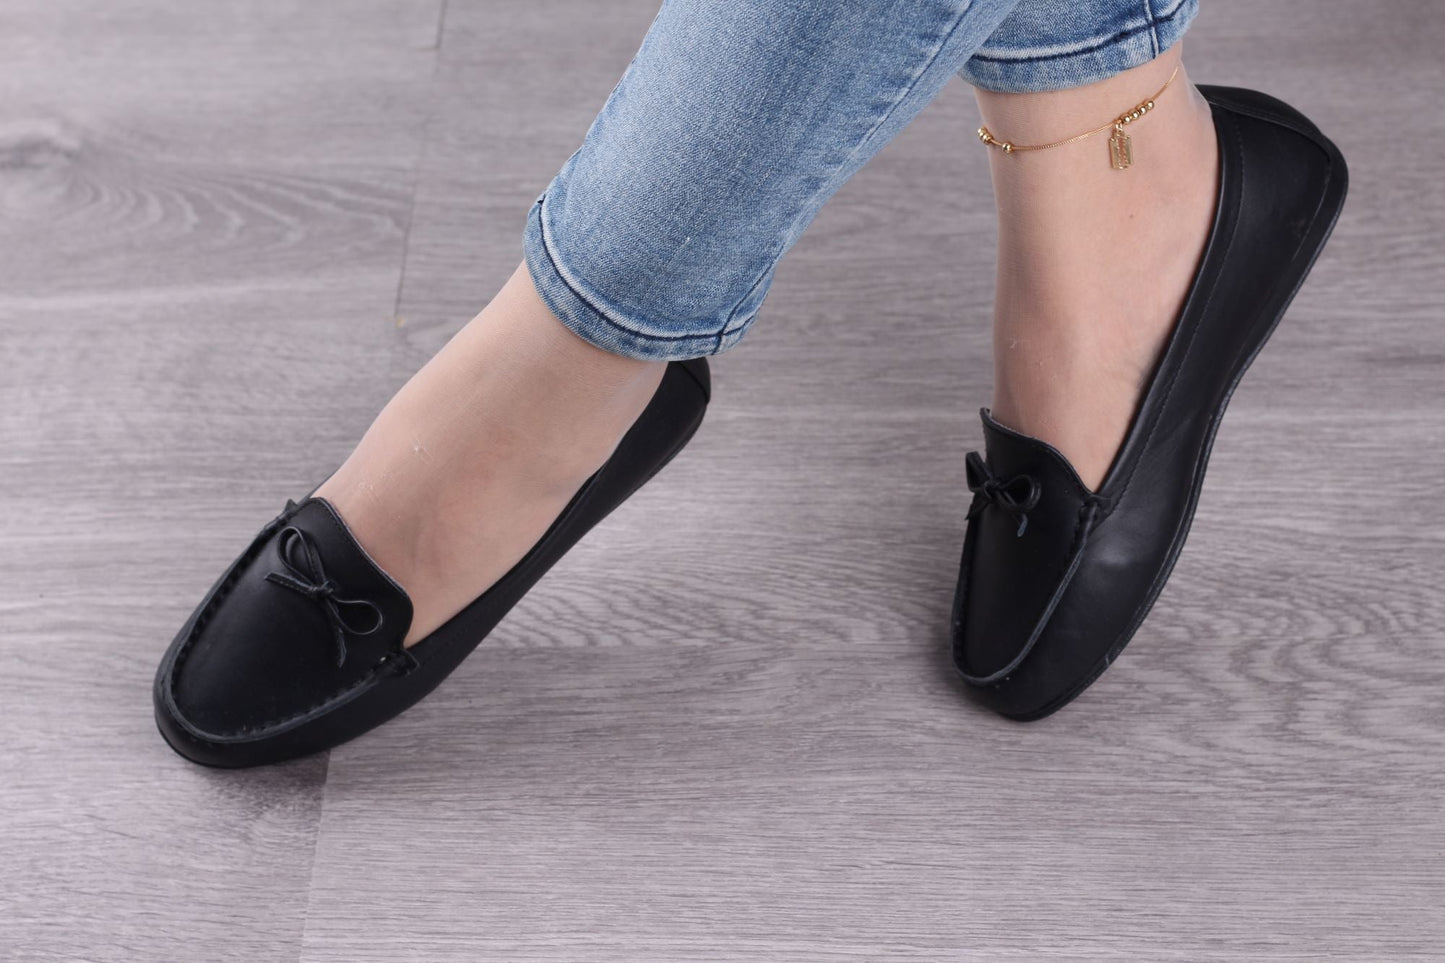 Women's genuine leather shoes that show your elegance and provide you with the greatest amount of comfort for long walks without fatigue